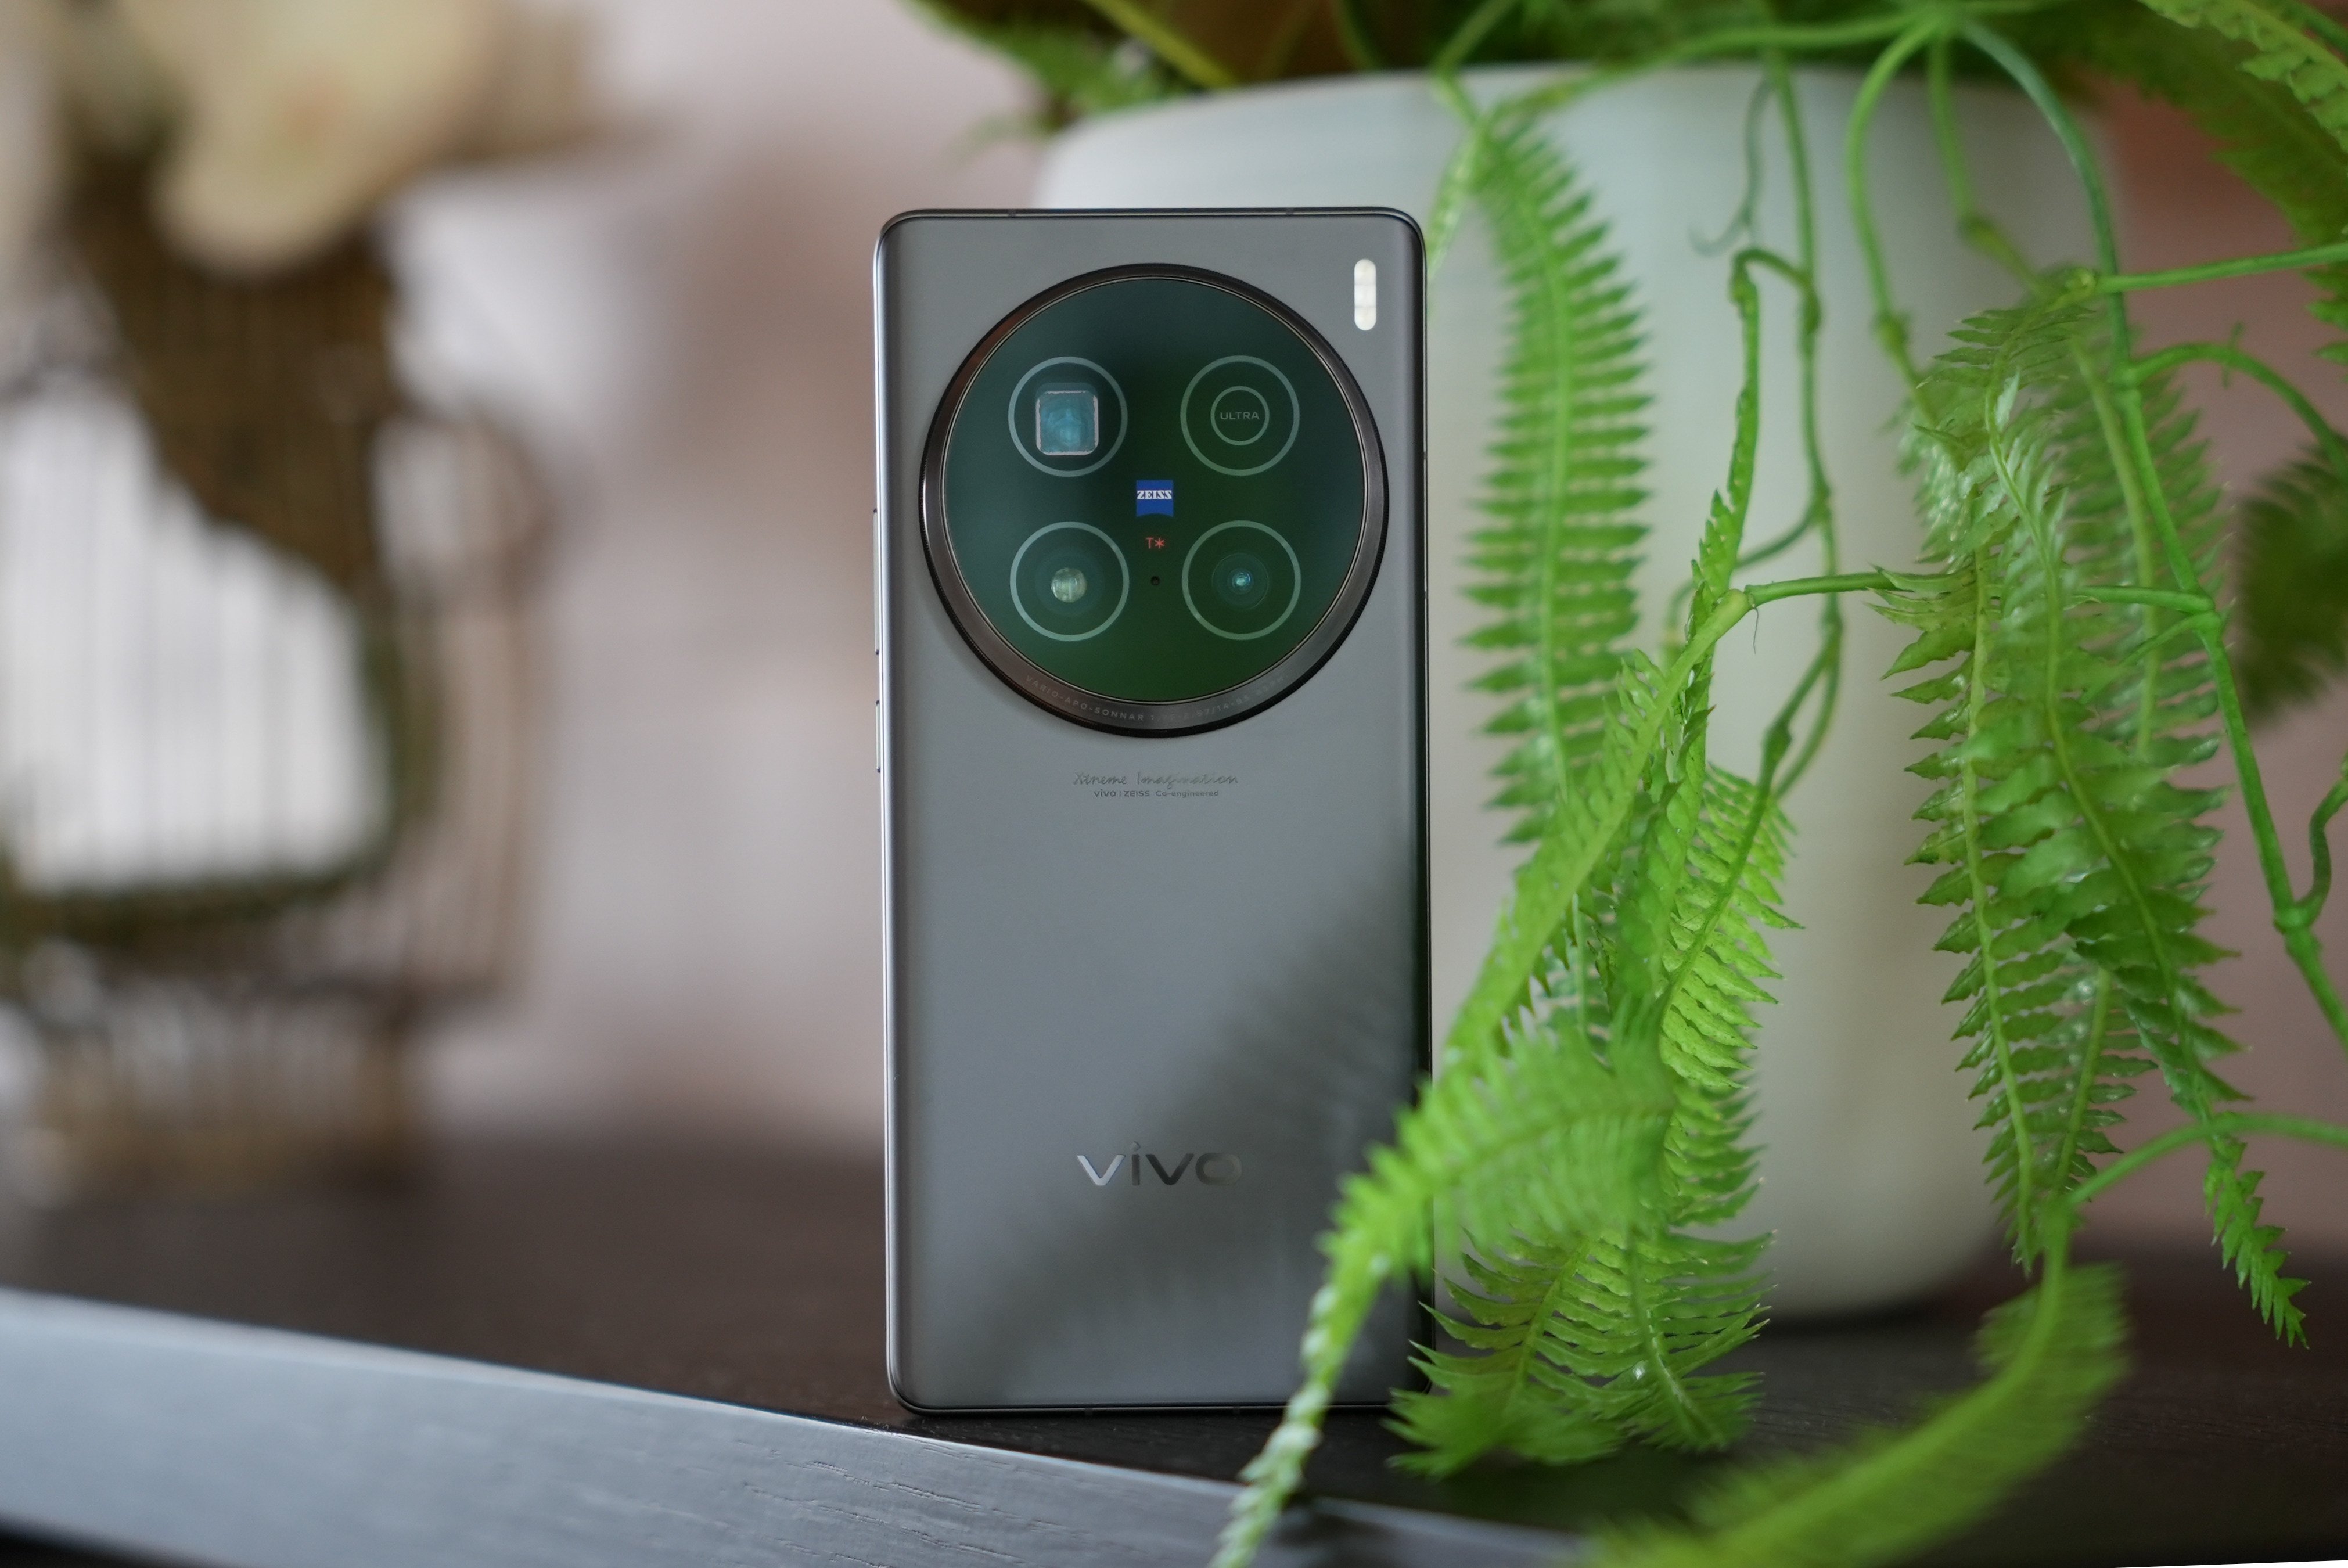 The Vivo X100 Ultra’s big camera module houses giant sensors and high-spec lenses that make it the best camera phone on the market. For now it is officially sold only in China. Photo: Ben Sin